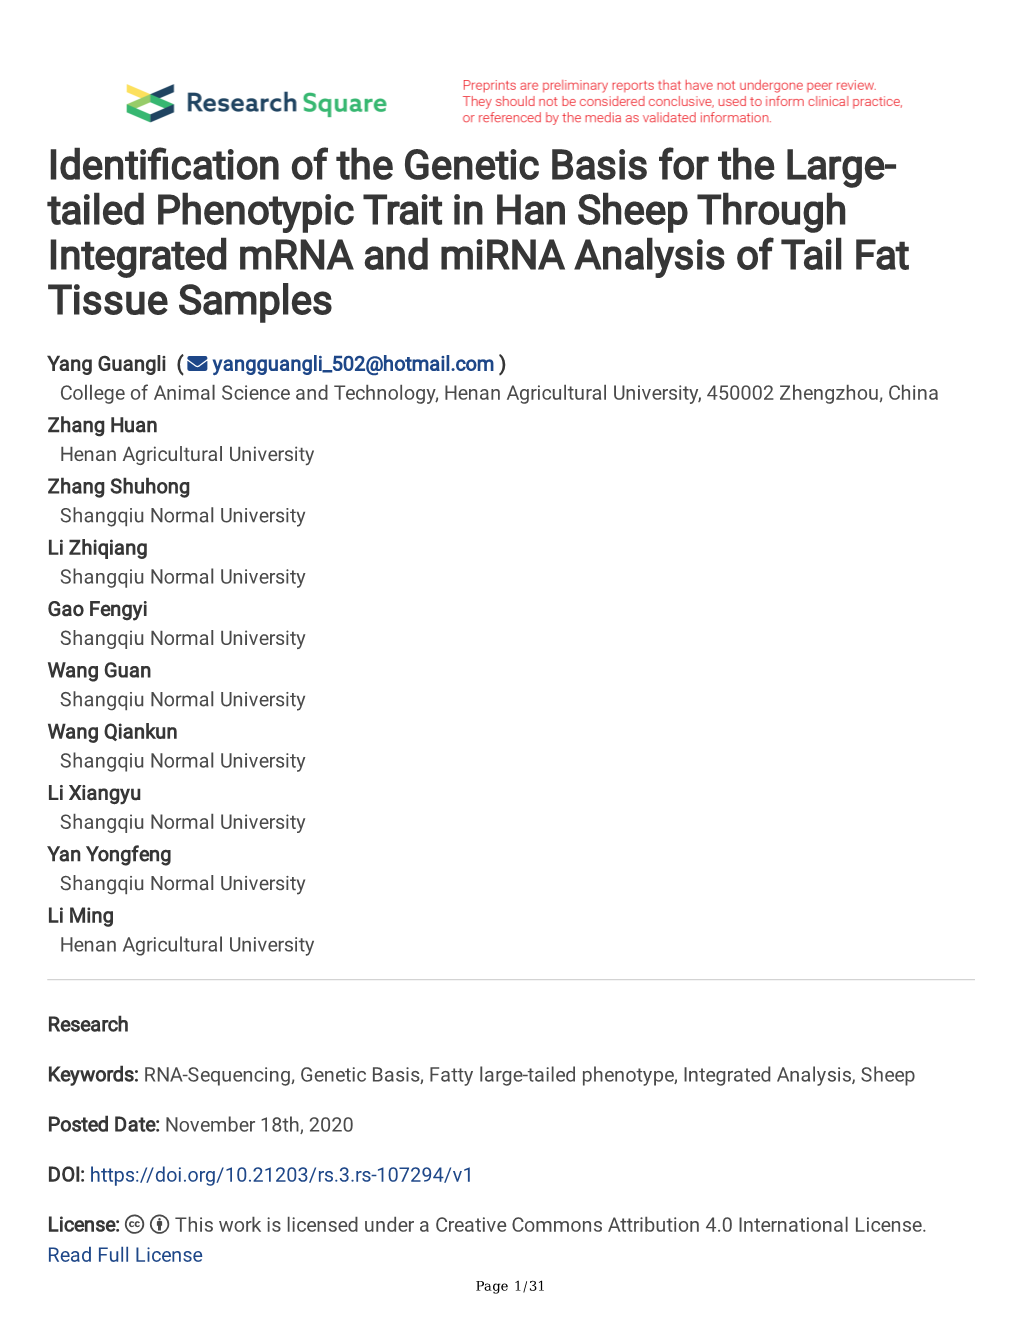 Identification of the Genetic Basis for the Large-Tailed Phenotypic Trait In